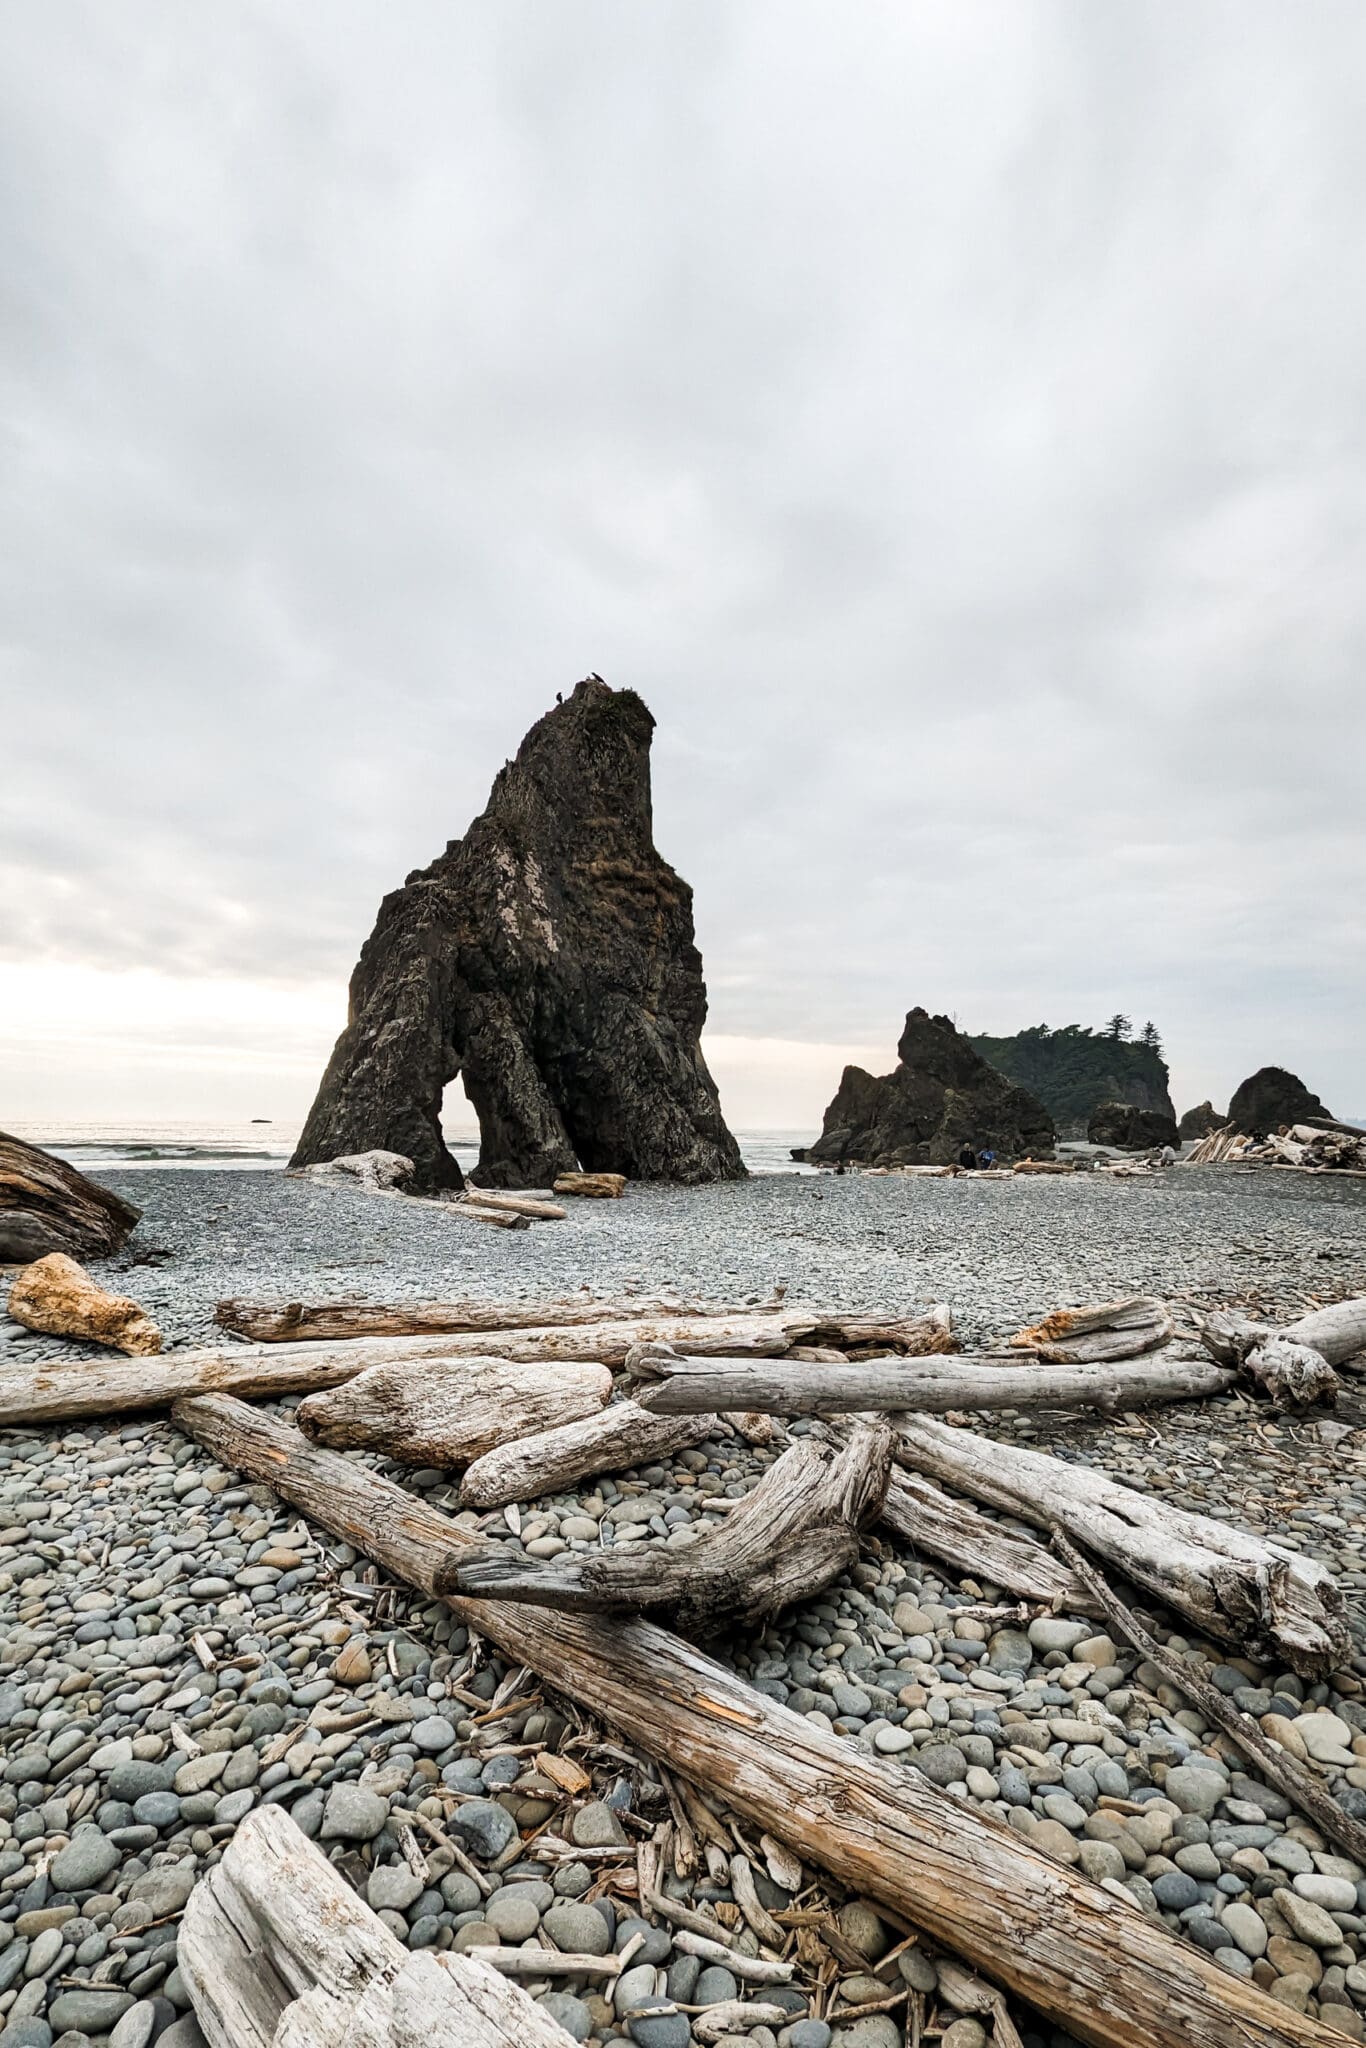 Large rocks and driftwood on Ruby Beach